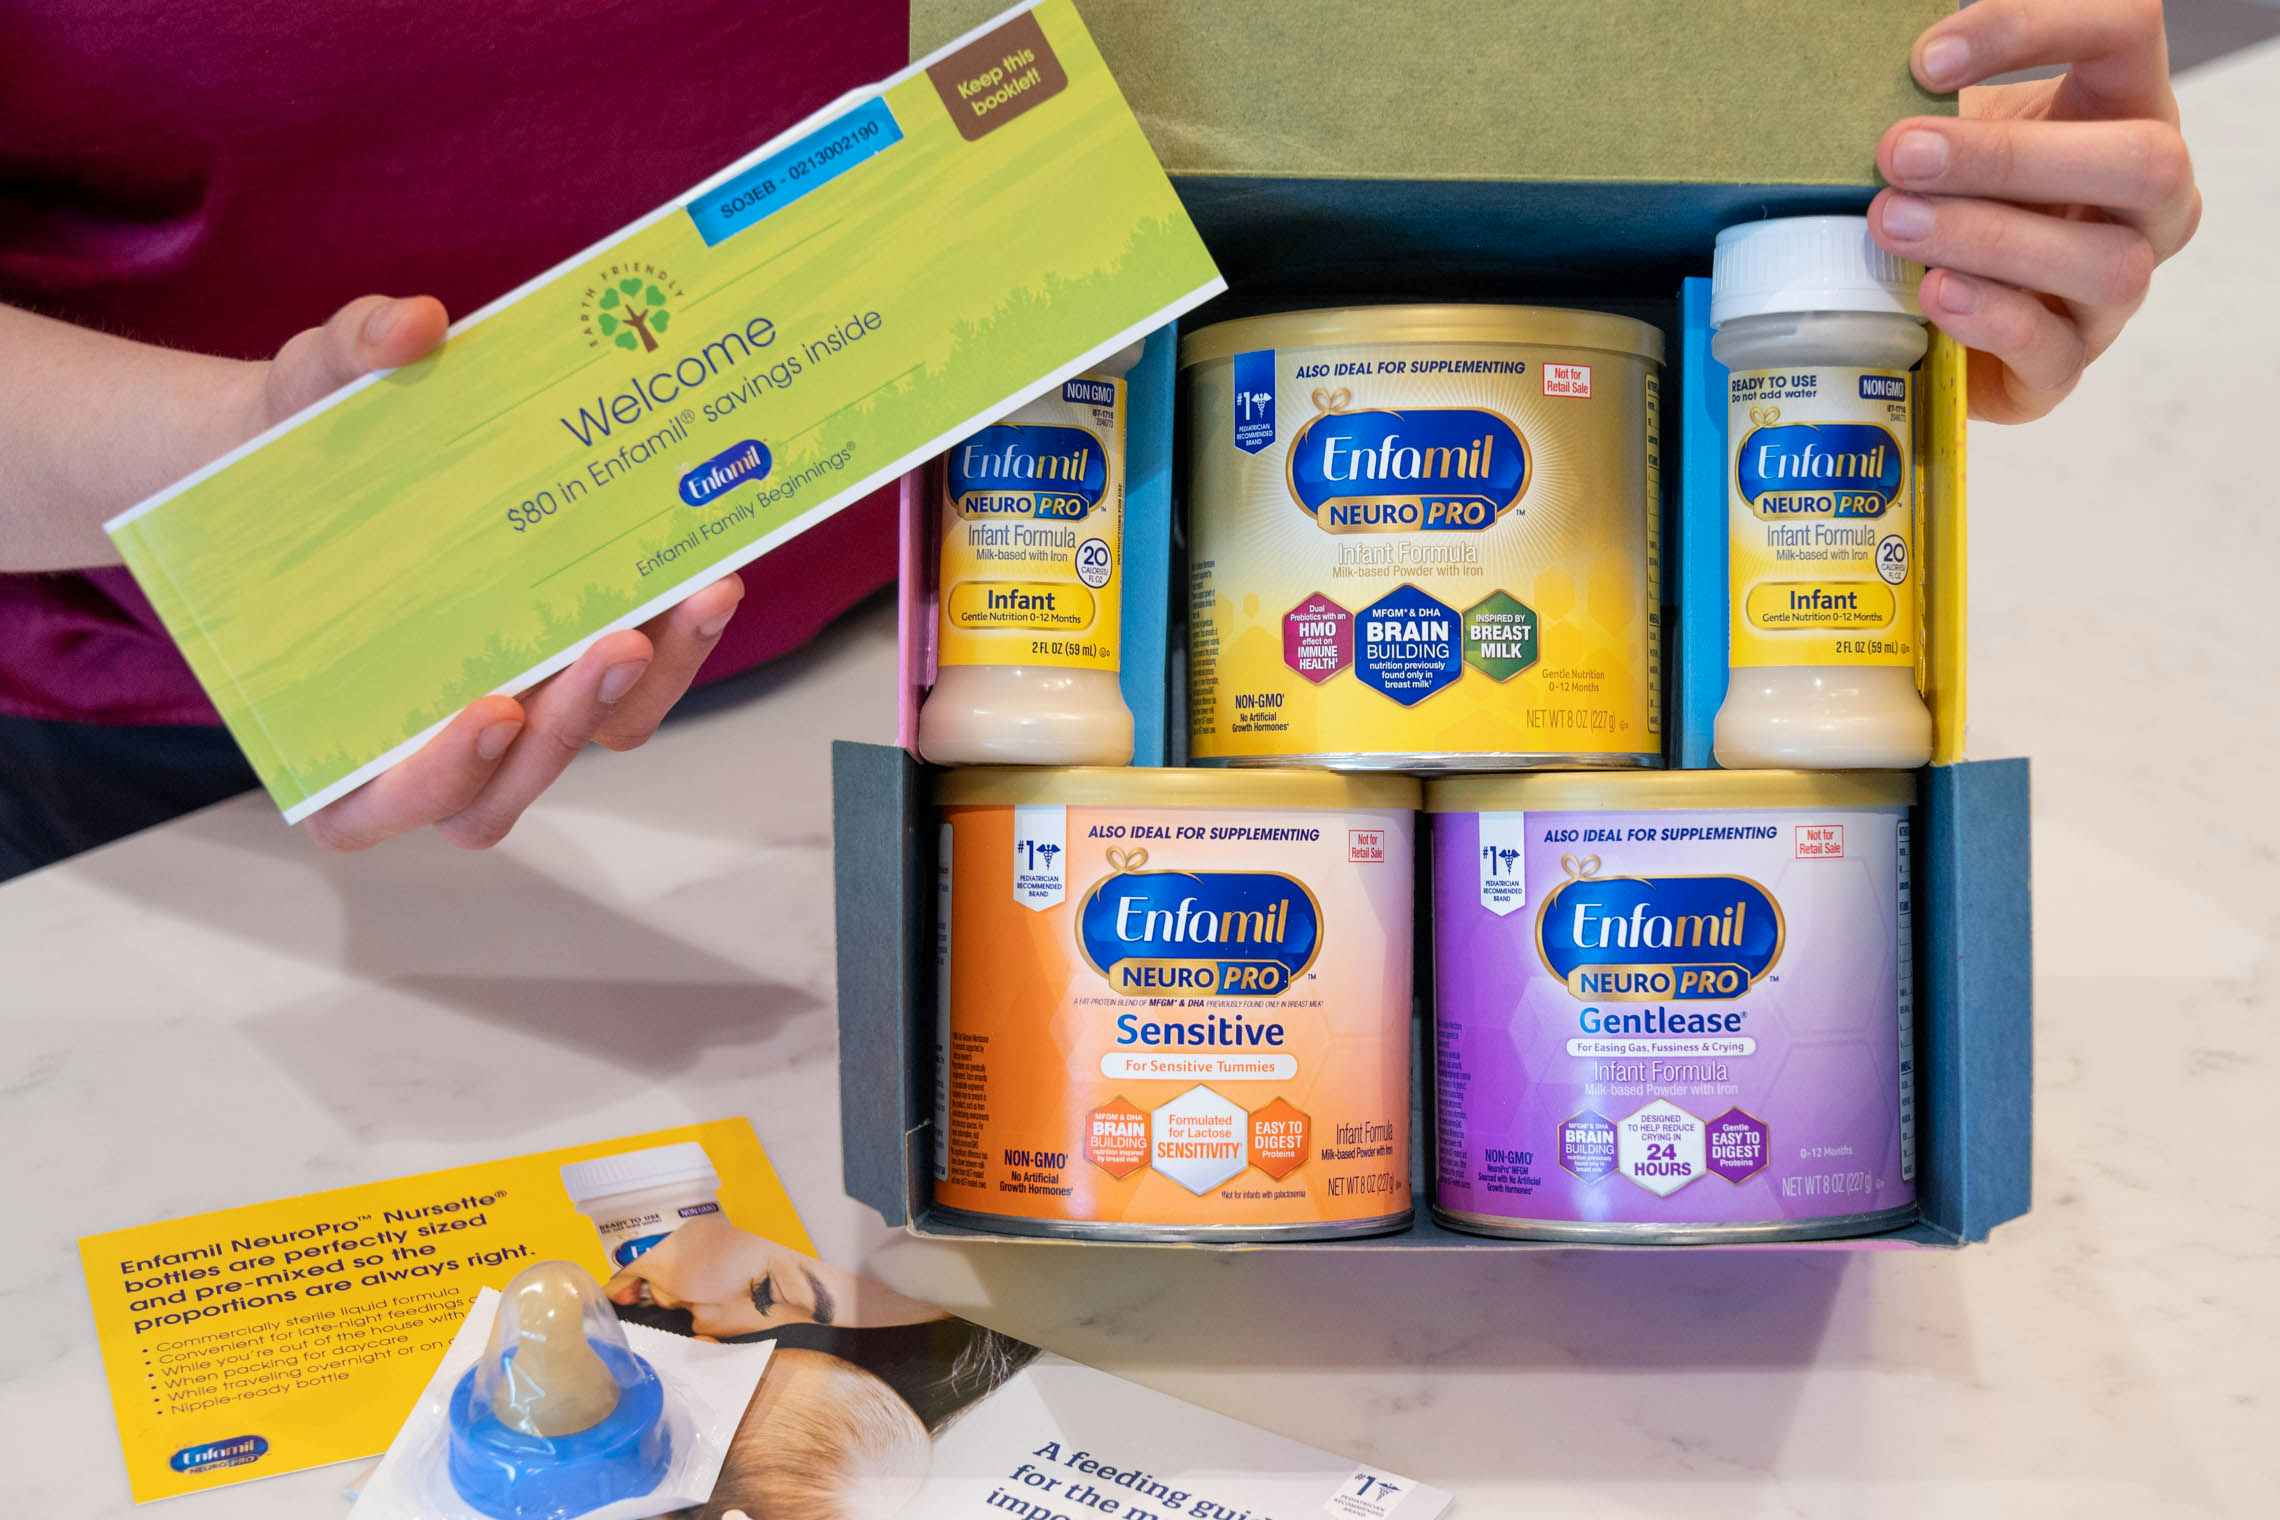 A woman holding up an Enfamil formula baby sample freebie box, showing the contents inside.